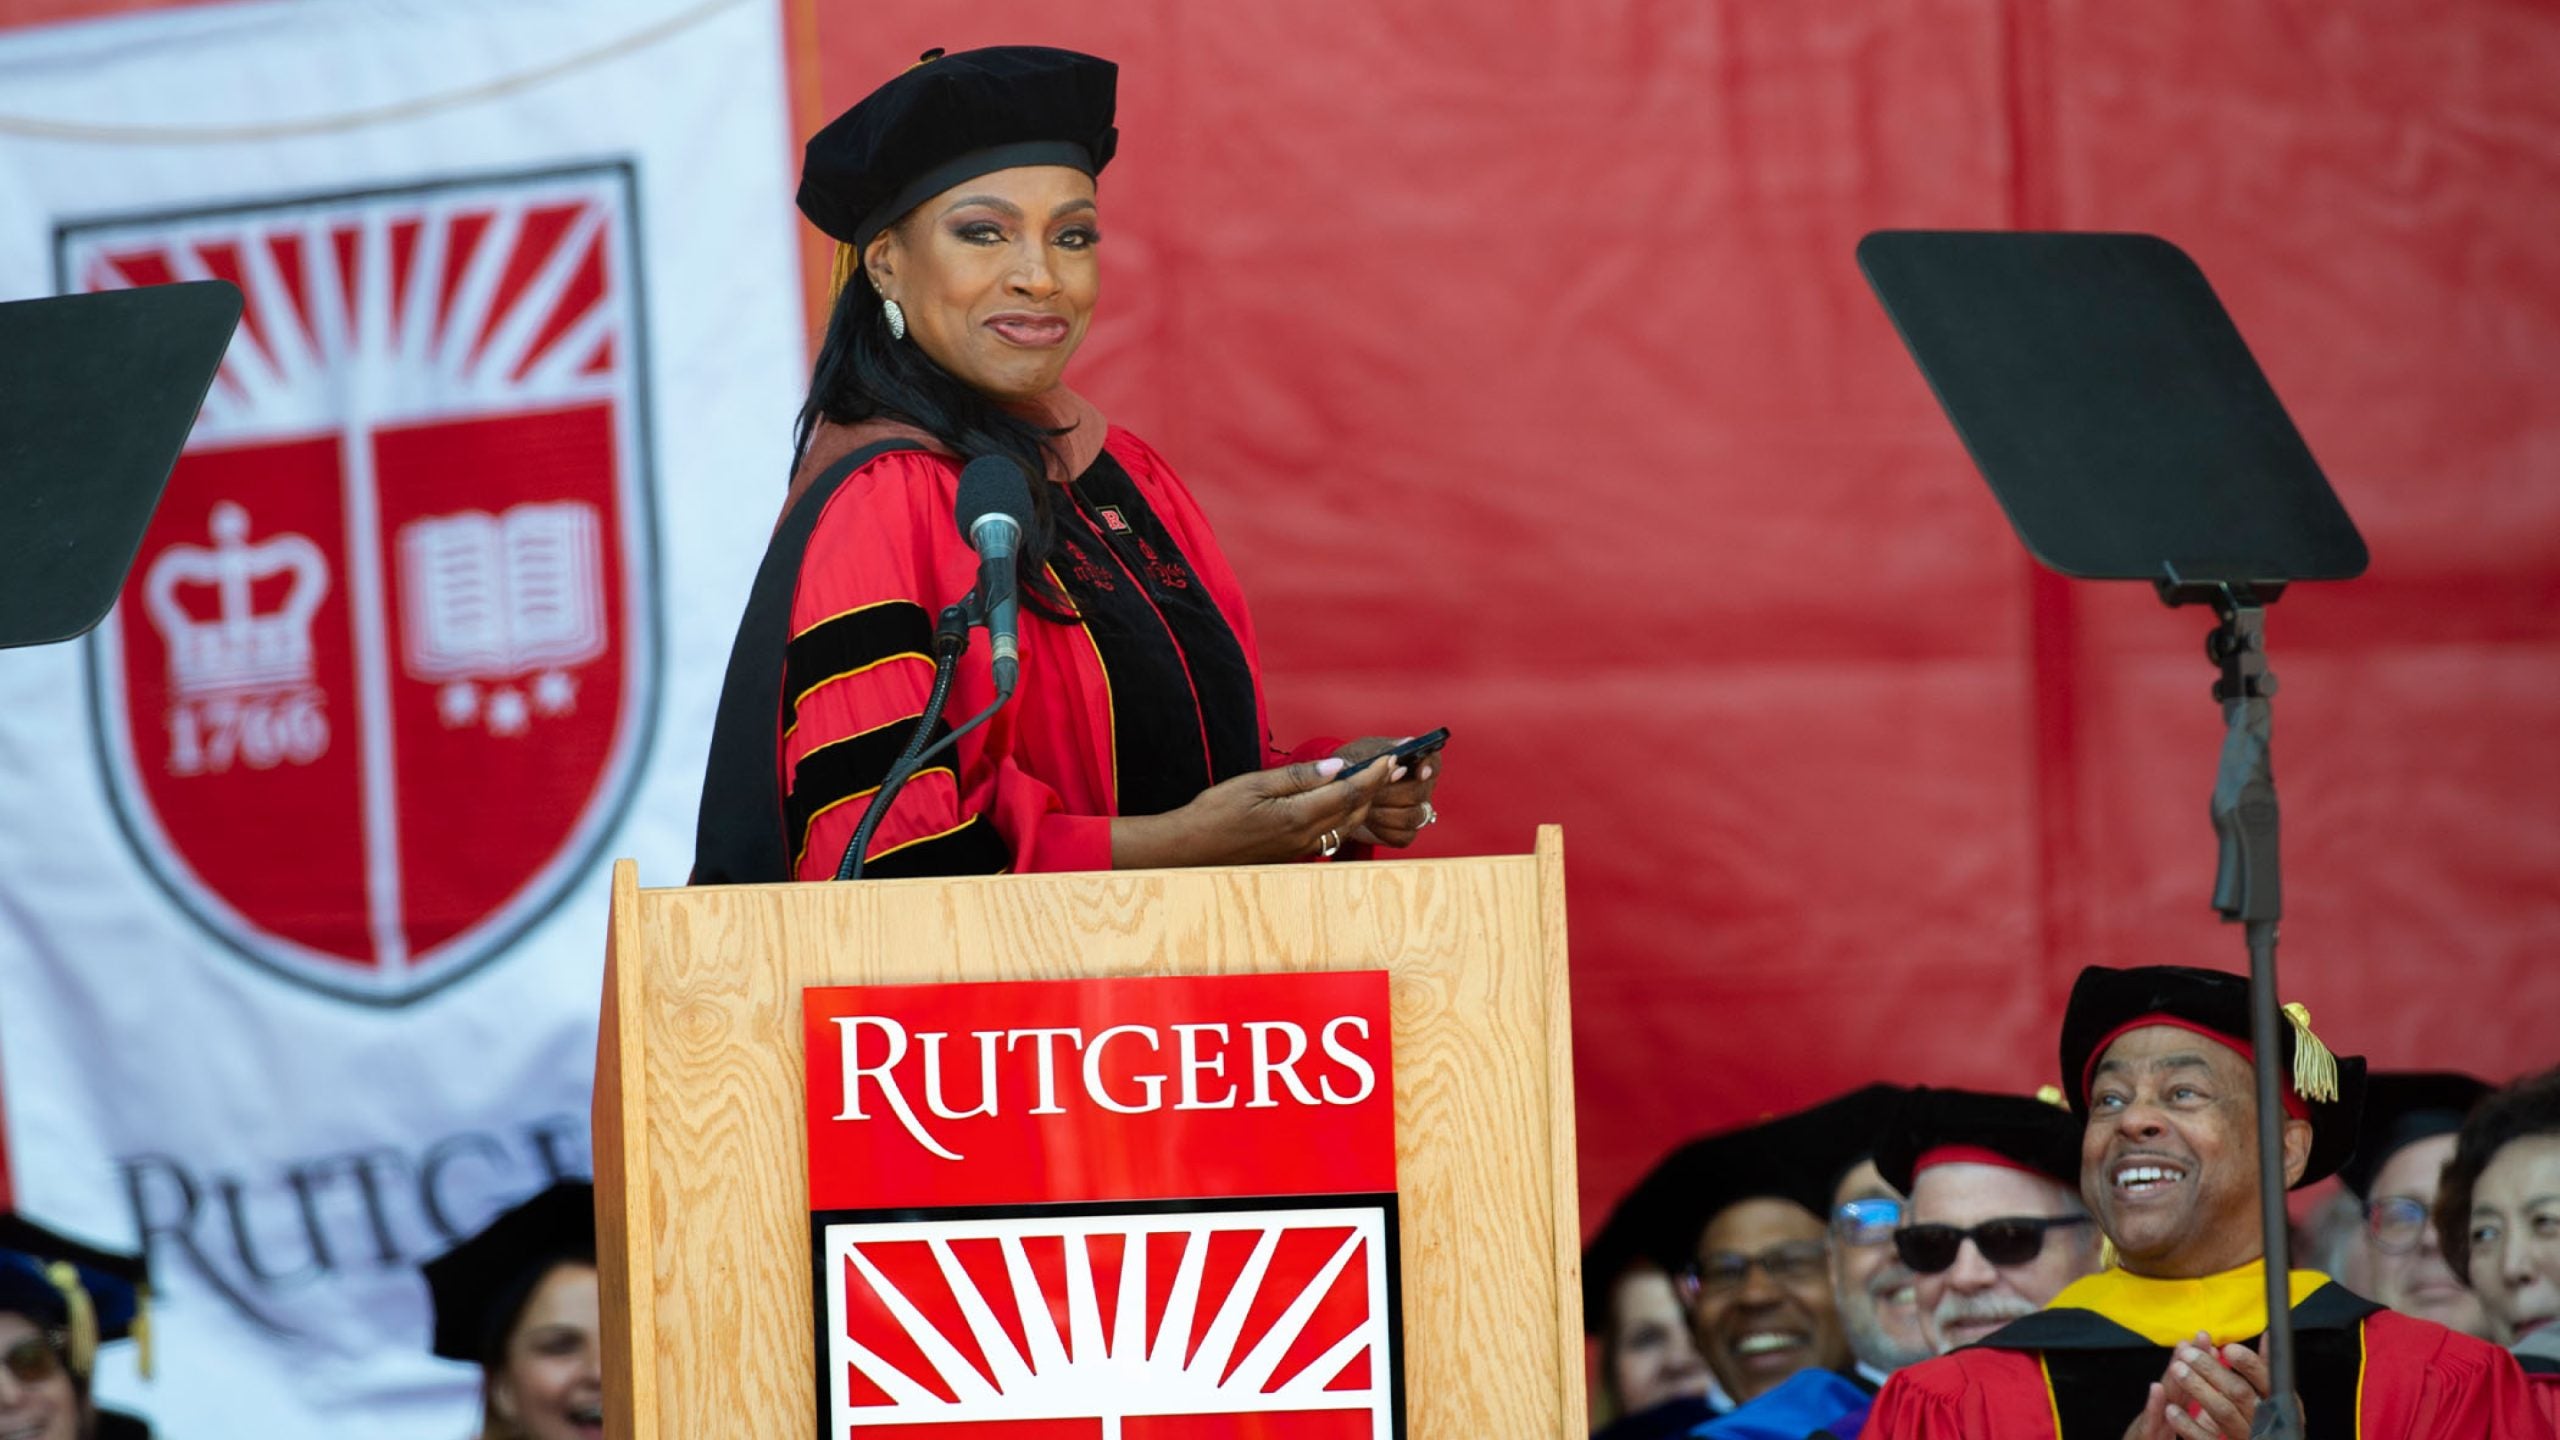 “Bring Your Best To The World”: Sheryl Lee Ralph Encourages Rutgers Graduates To Follow Their Dreams